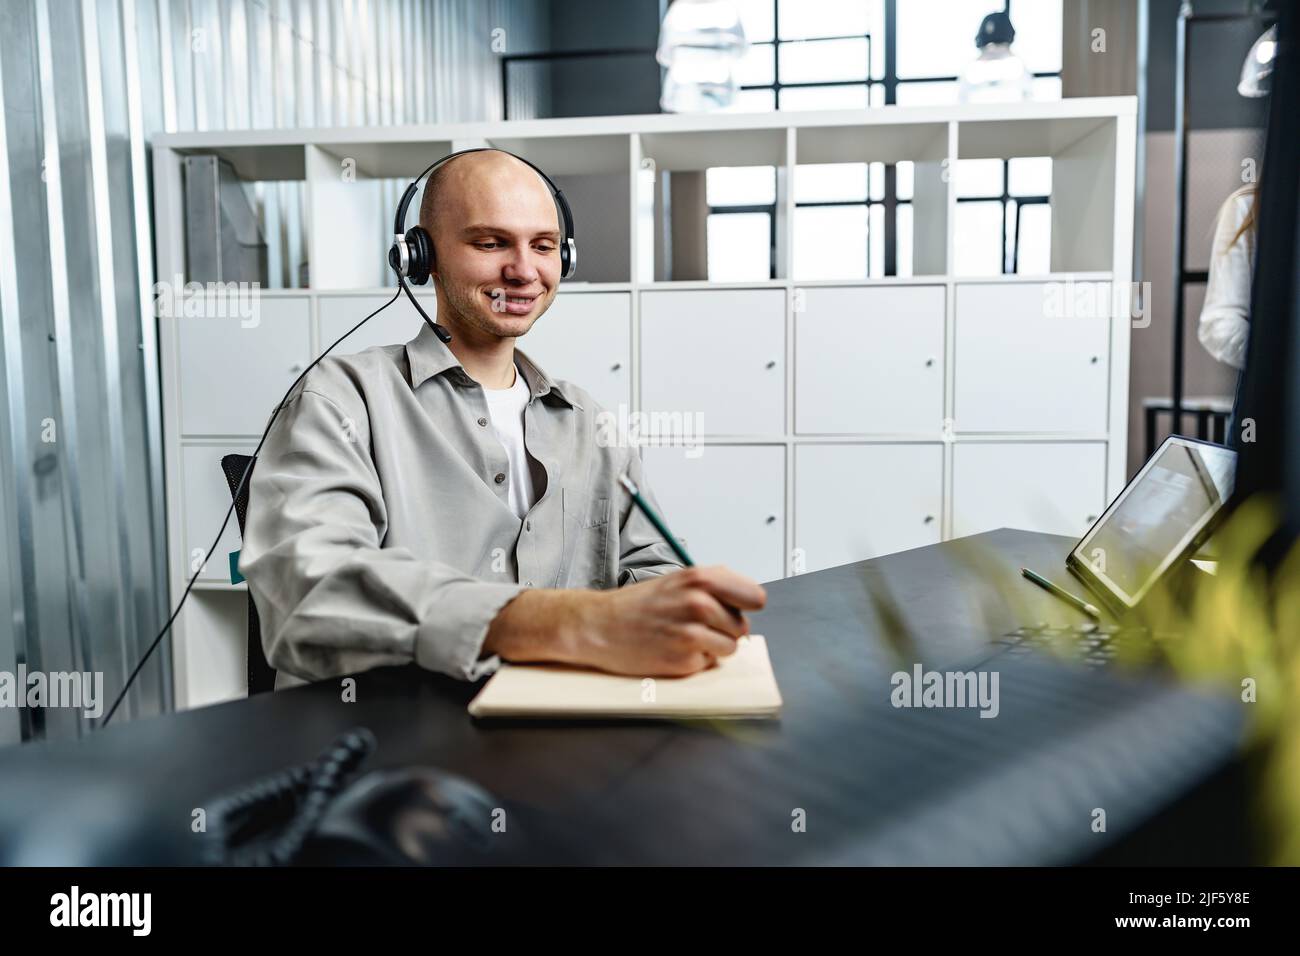 Young bald man working in a call center office Stock Photo